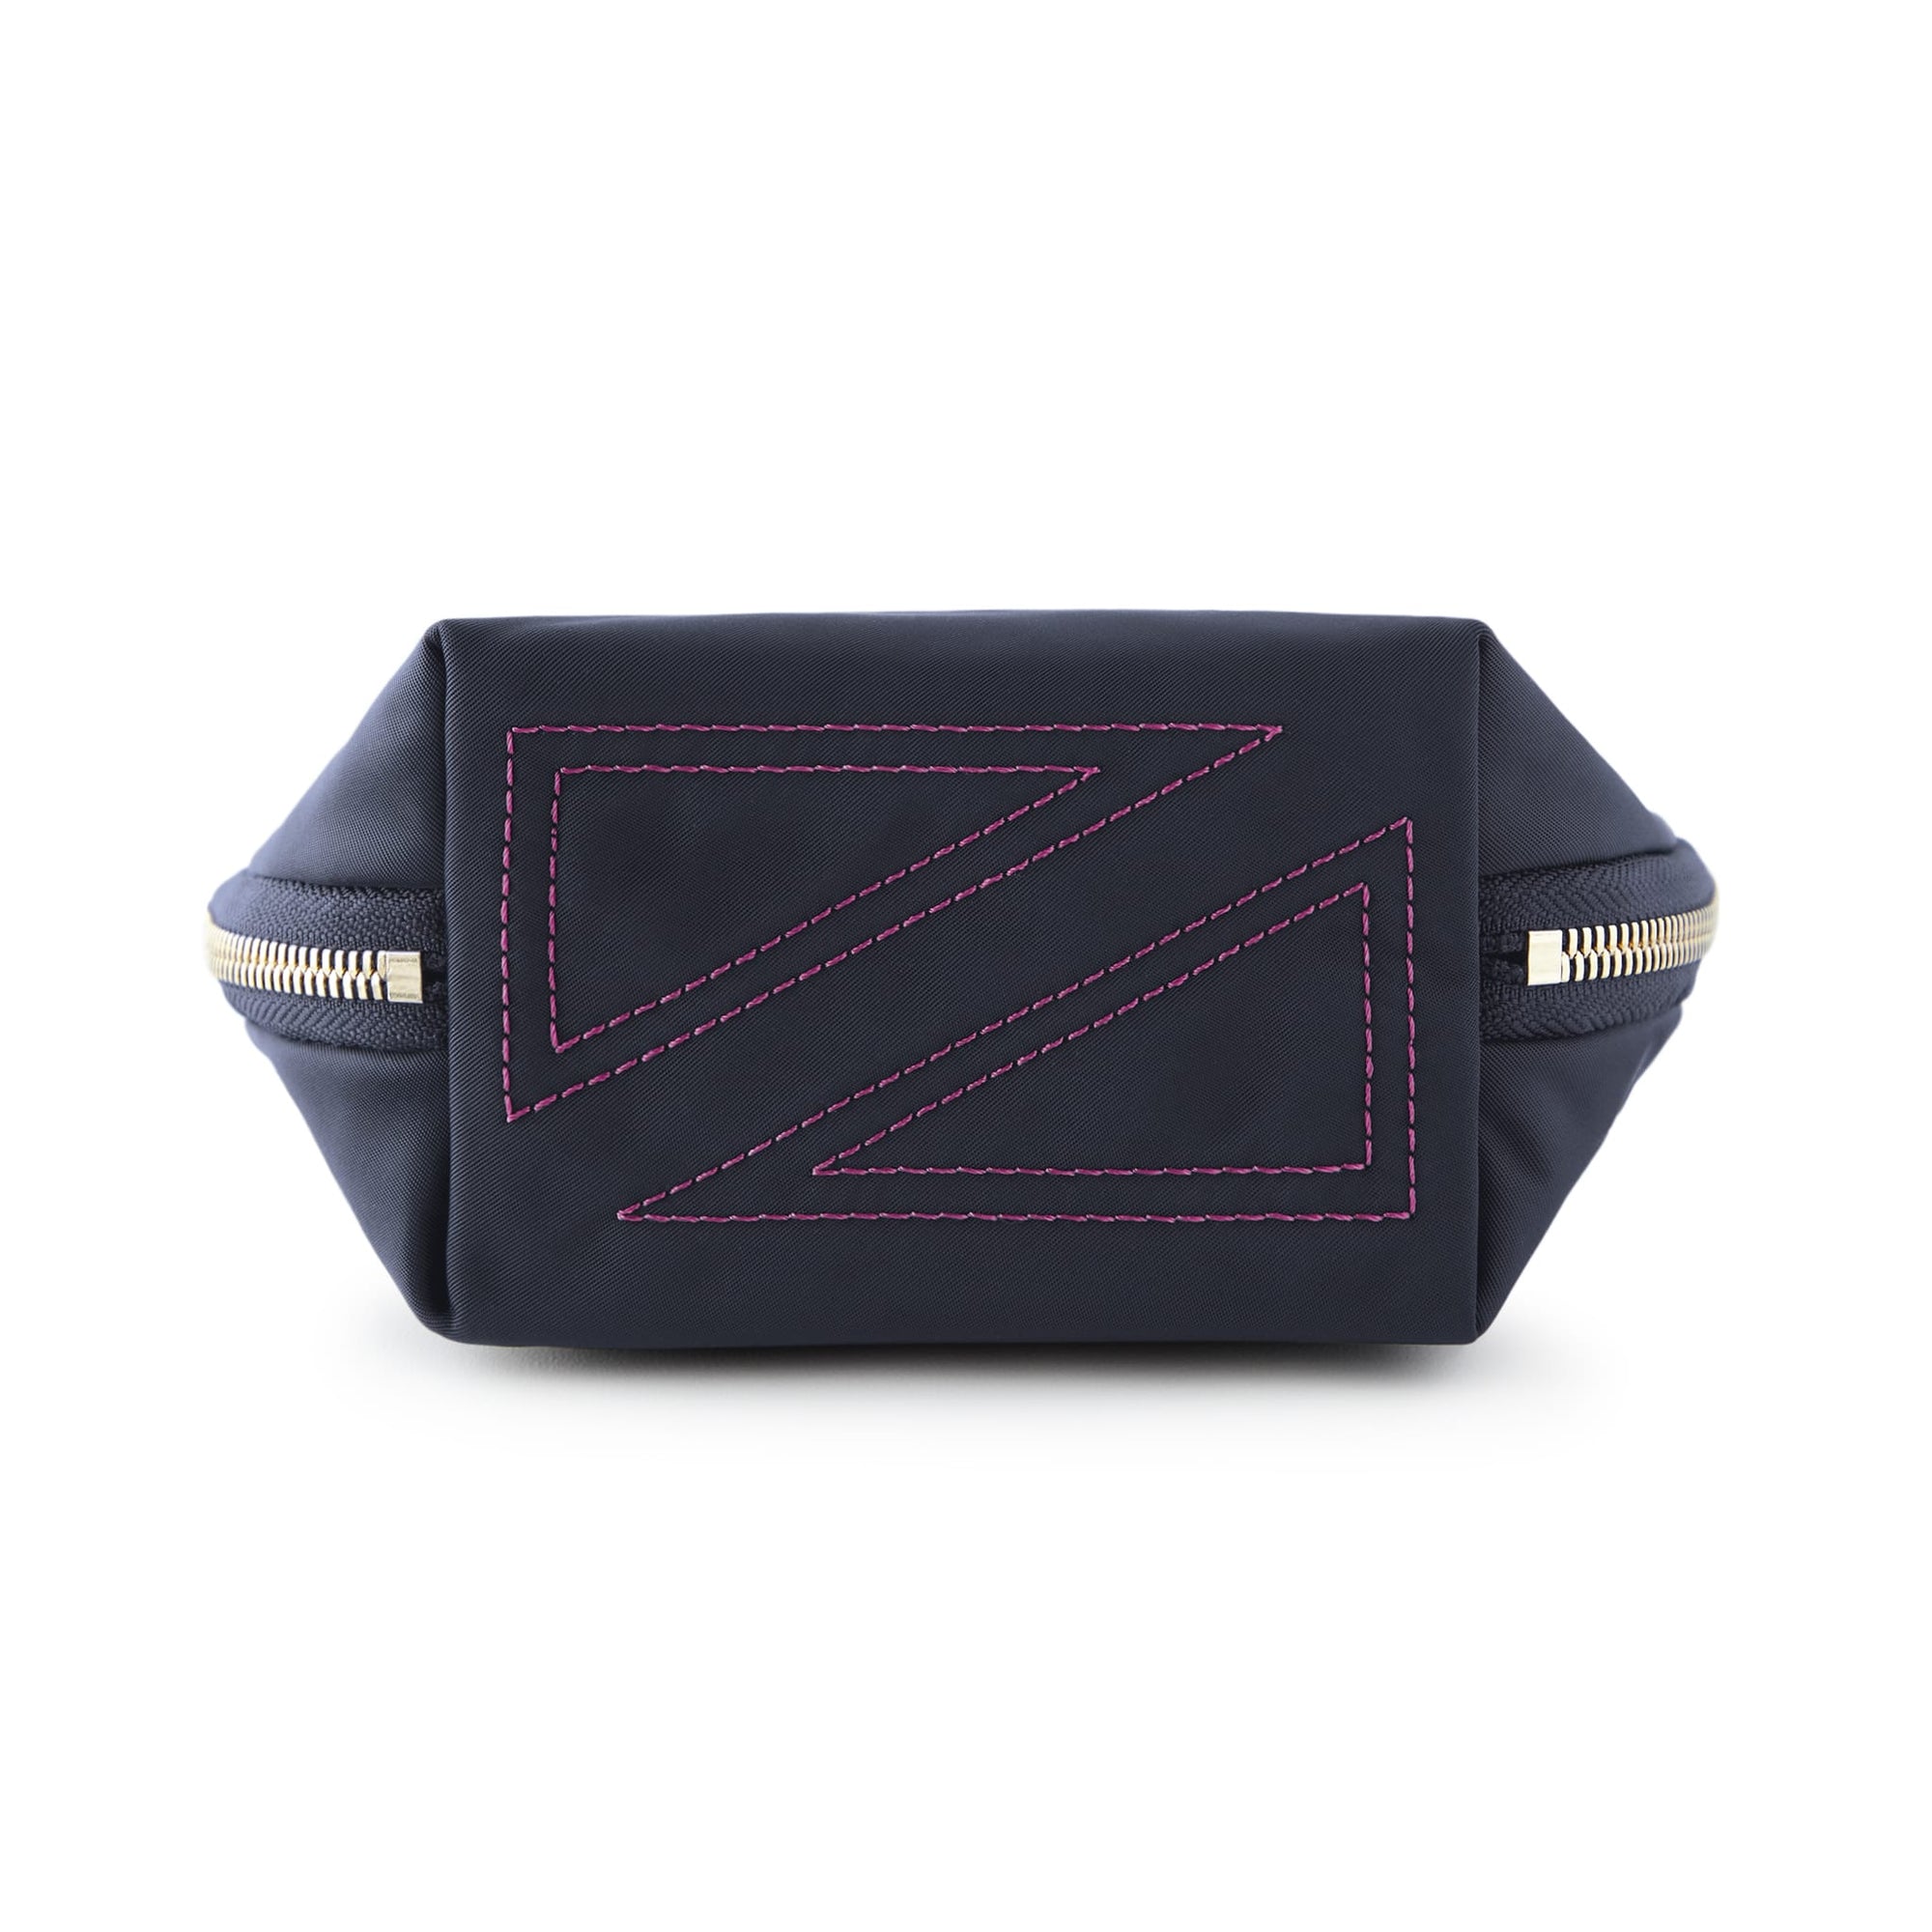 color: Navy Fabric with Pink Interior; alt: Everyday Small Size Makeup Bag | KUSSHI